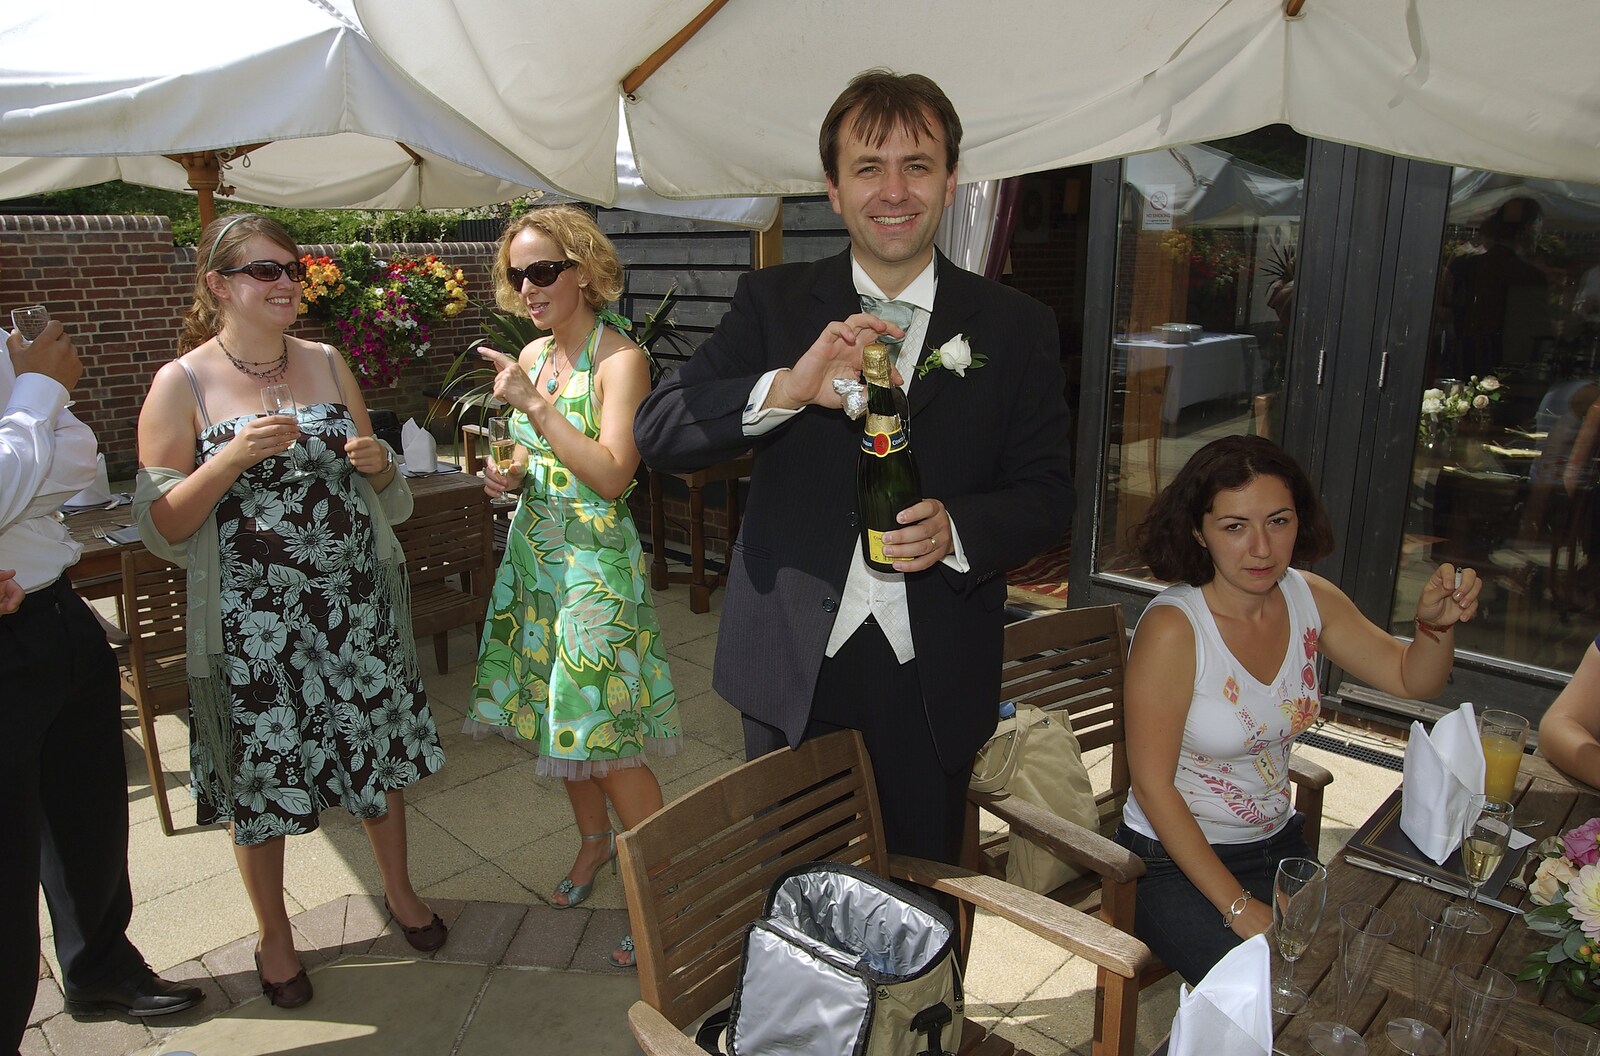 Liviu and Christina's Wedding Day, Babraham, Cambridge - 11th August 2007: Liviu waves a bottle of bubbly about